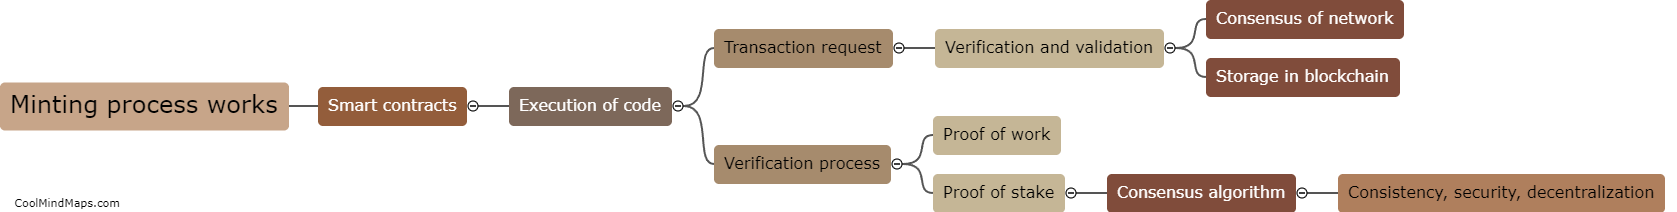 How does the minting process work under smart contracts?